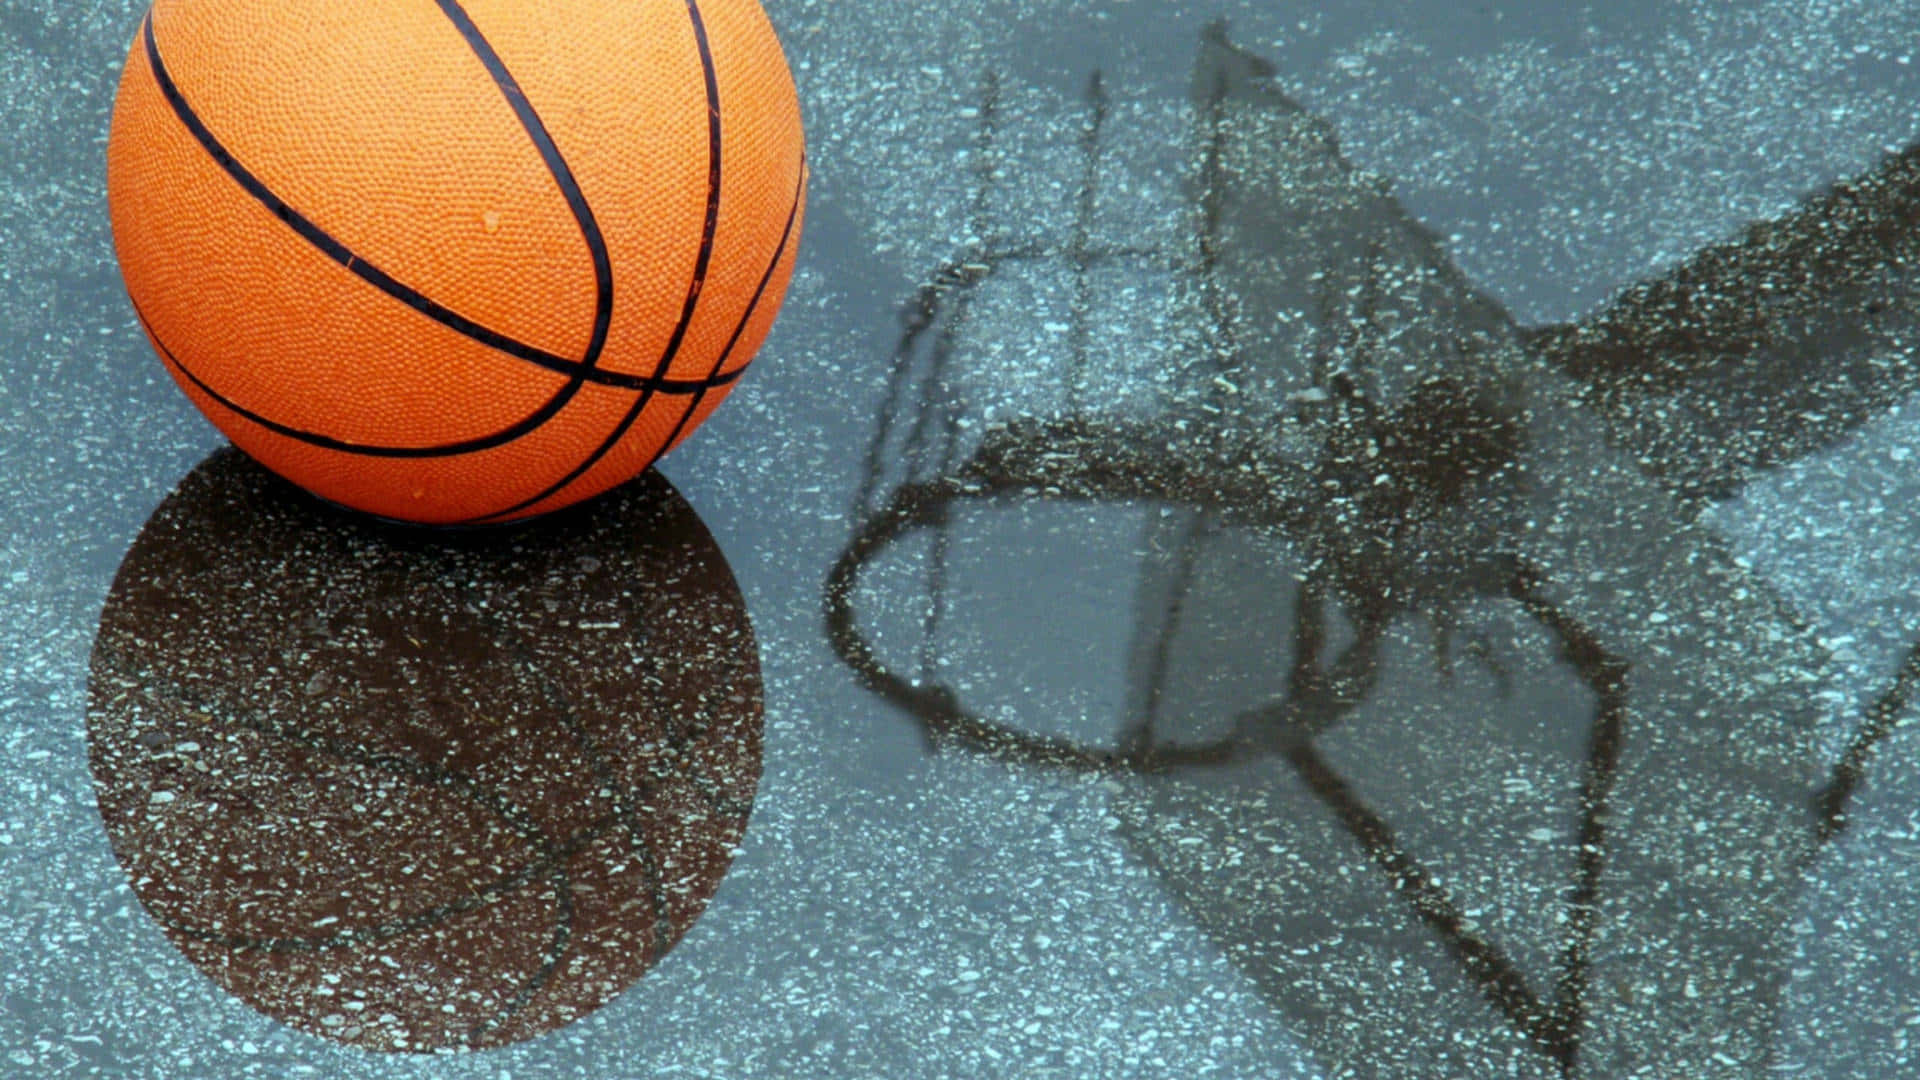 Hd Background Of Basketball On Puddled Ground Wallpaper